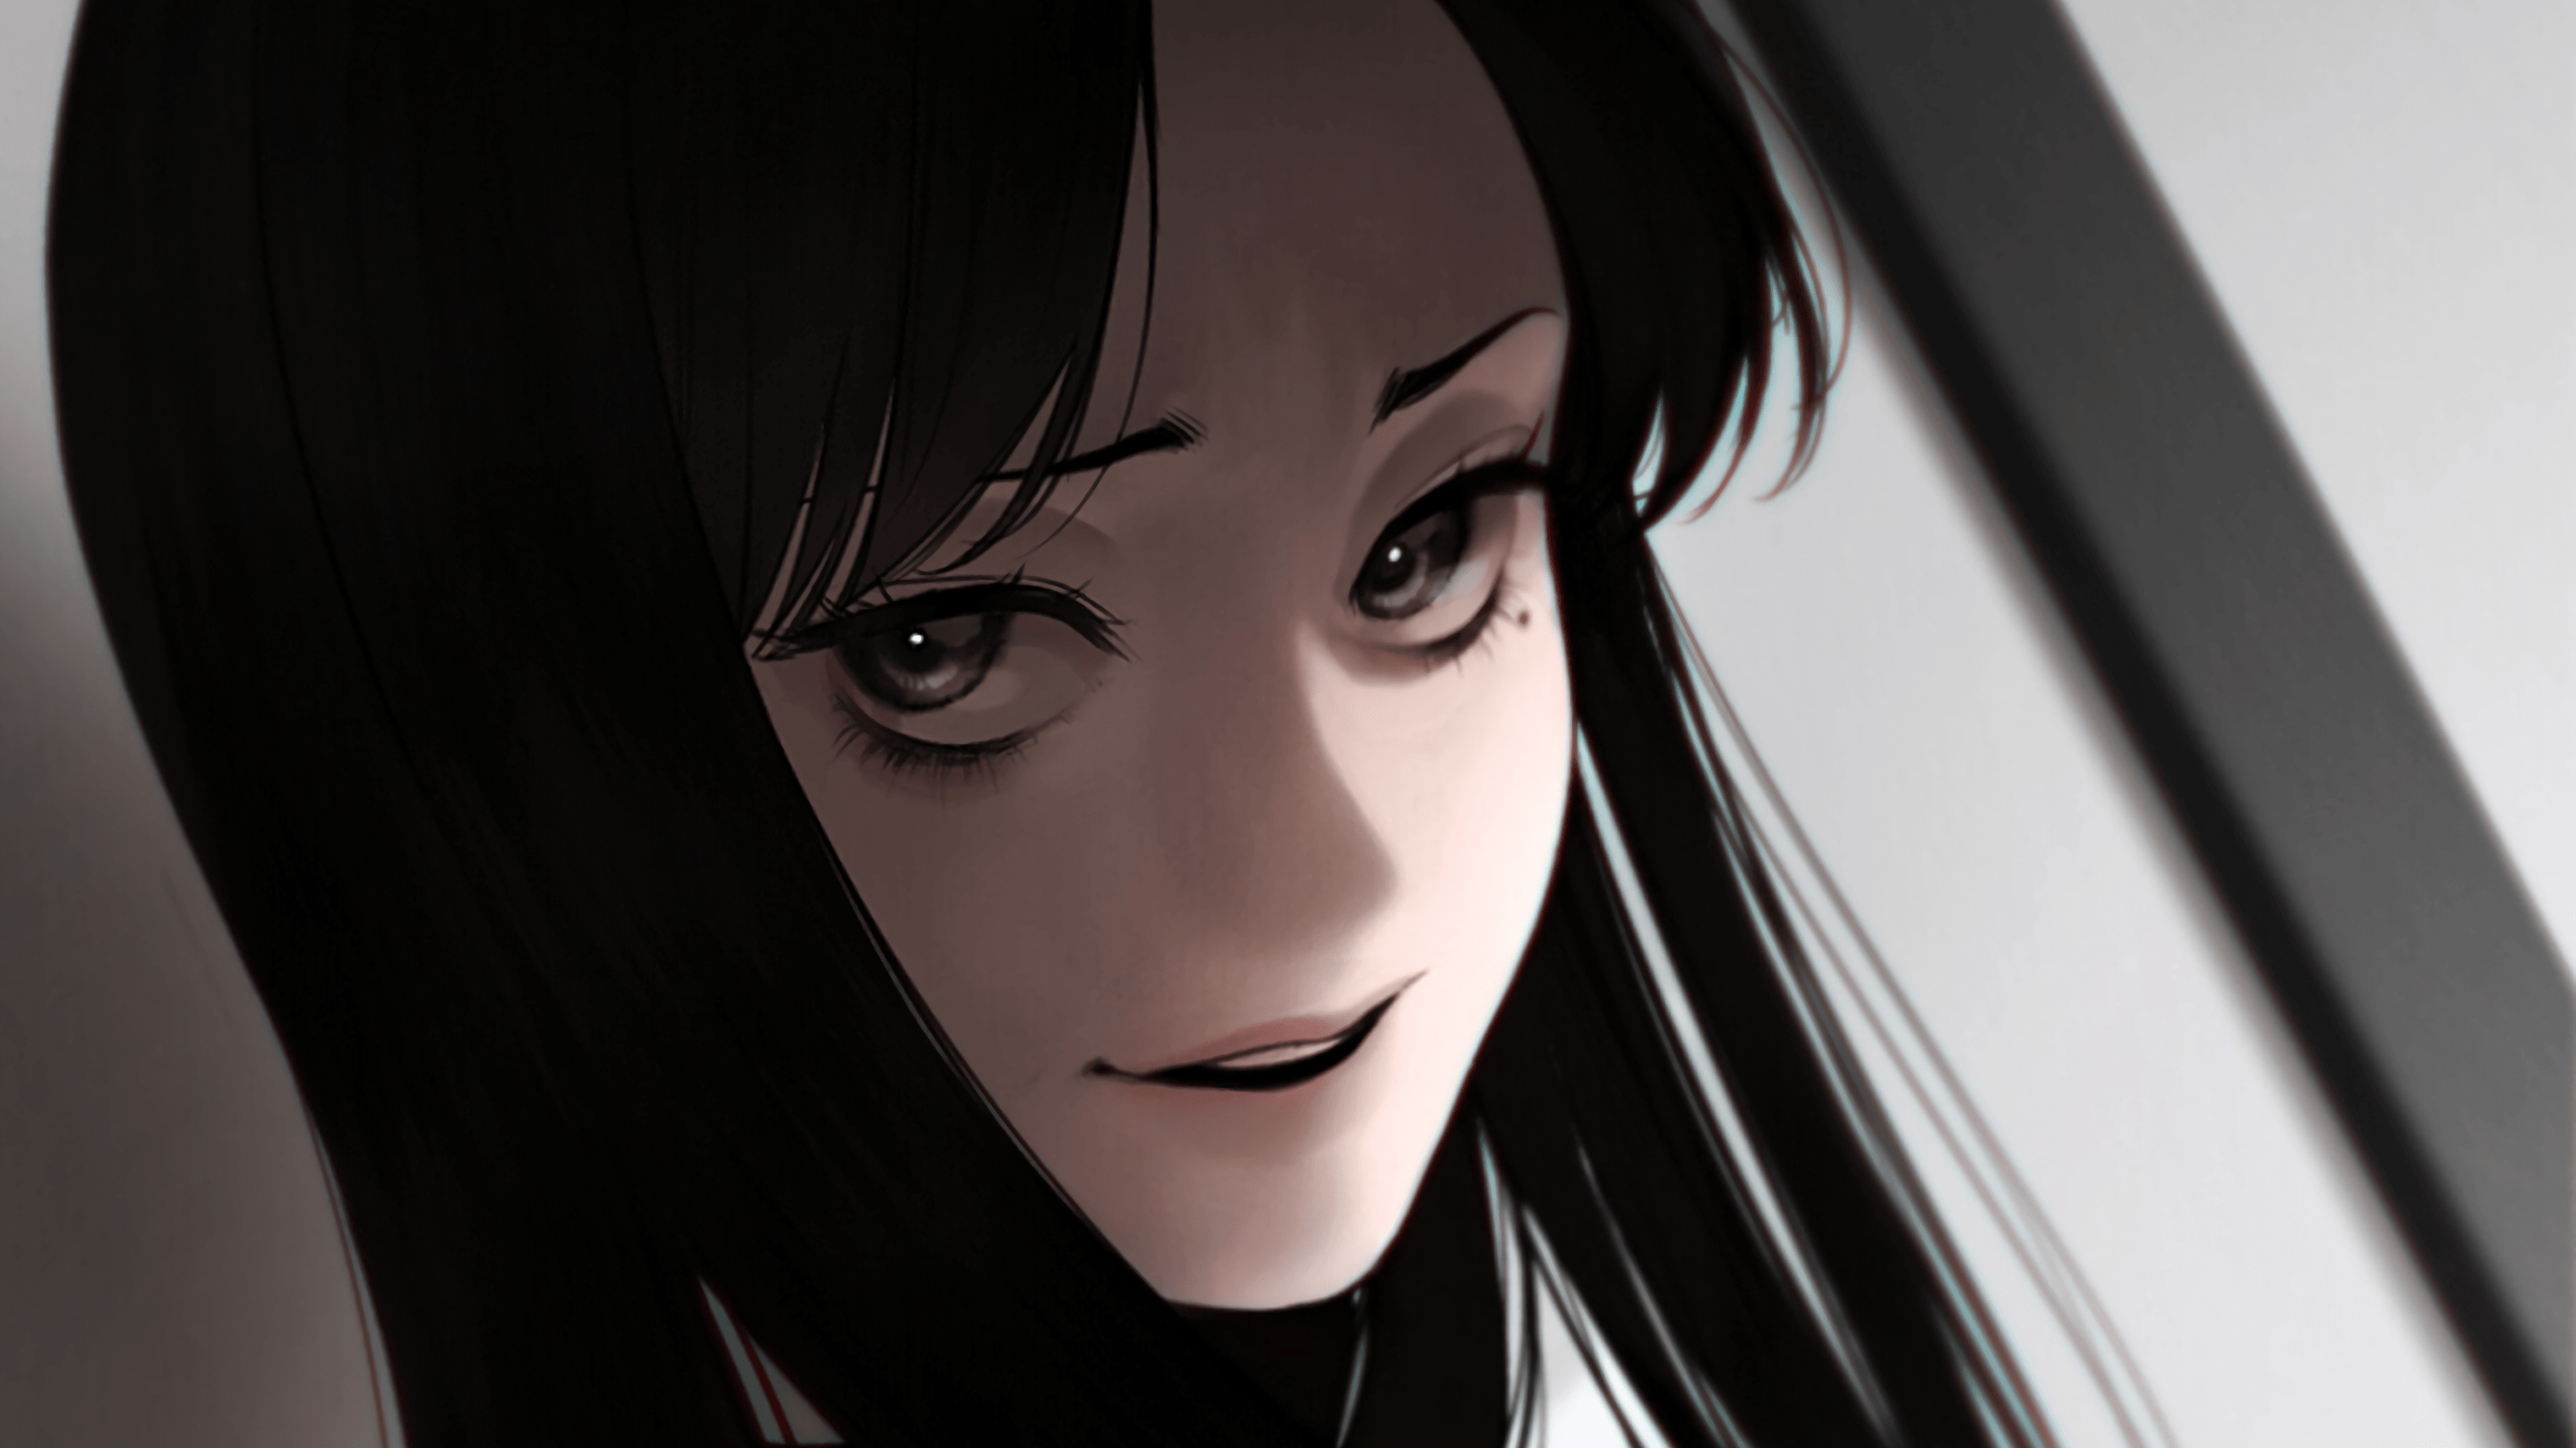 Tomie HD Wallpaper. Background Imagex1617